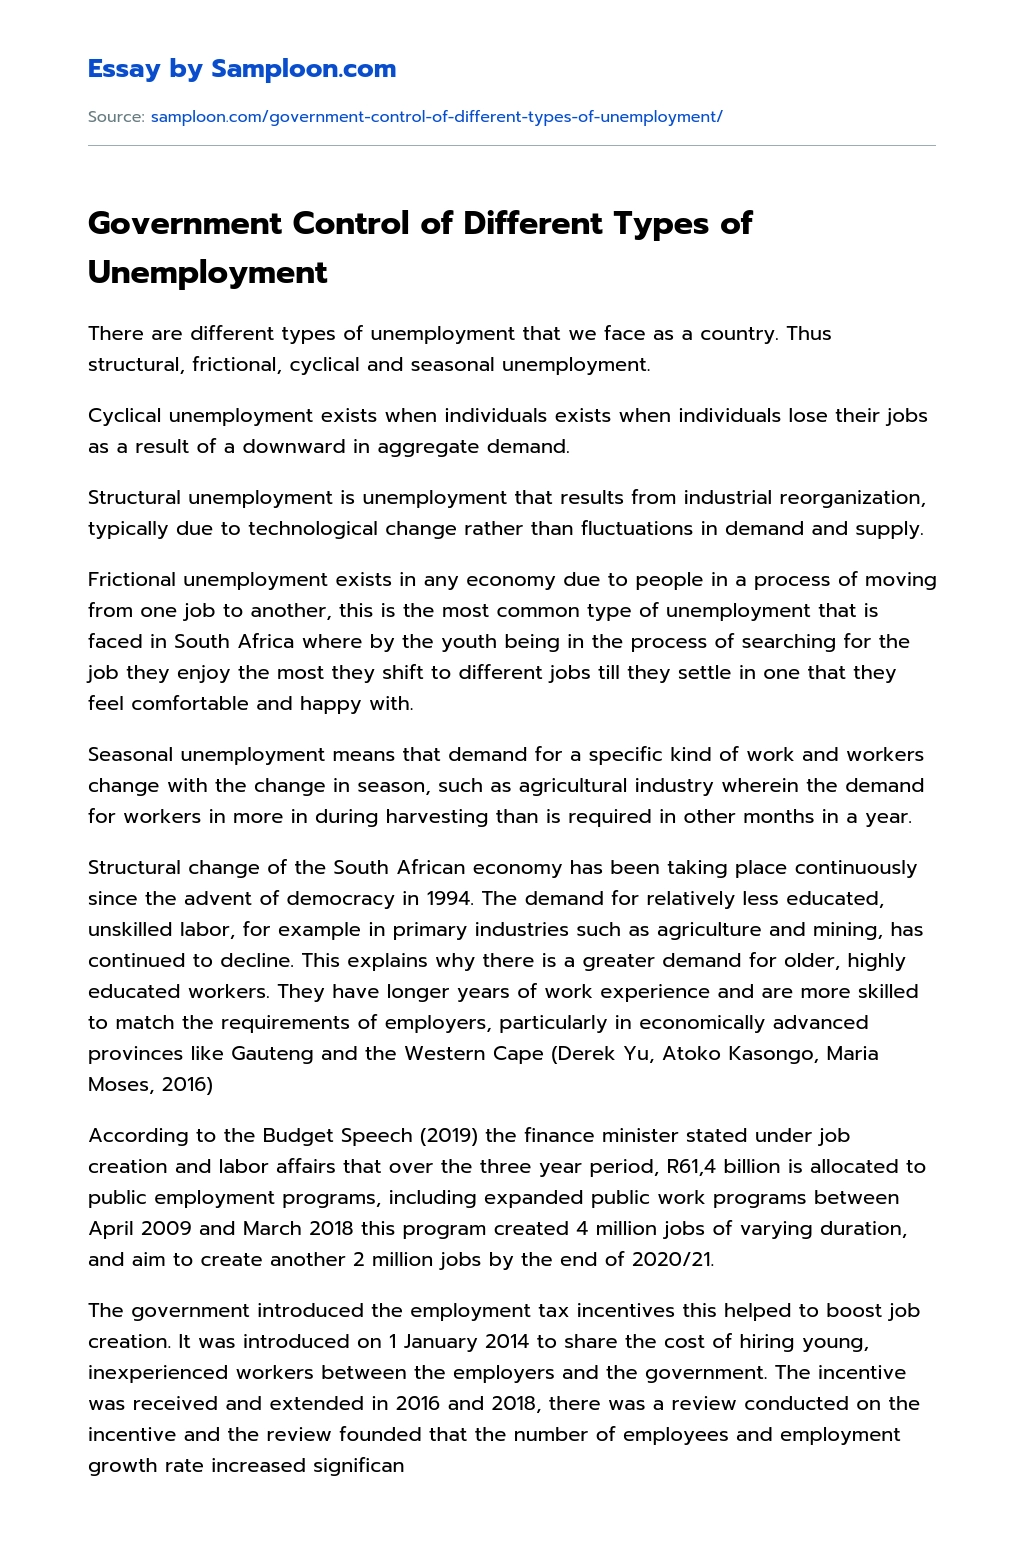 Government Control of Different Types of Unemployment essay